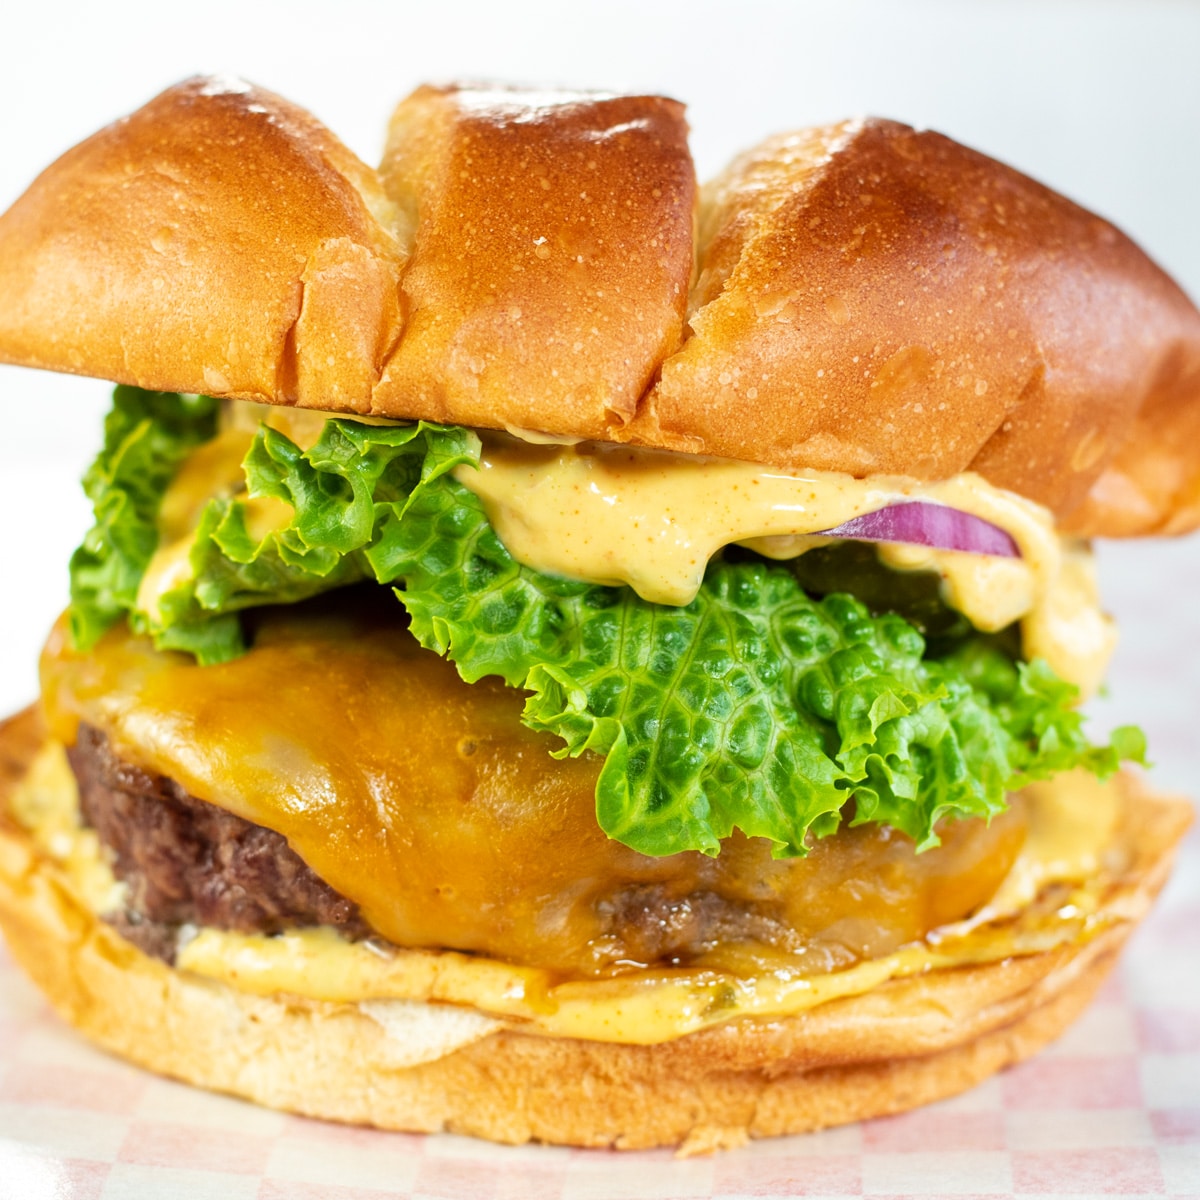 Square image of a burger with burger sauce.